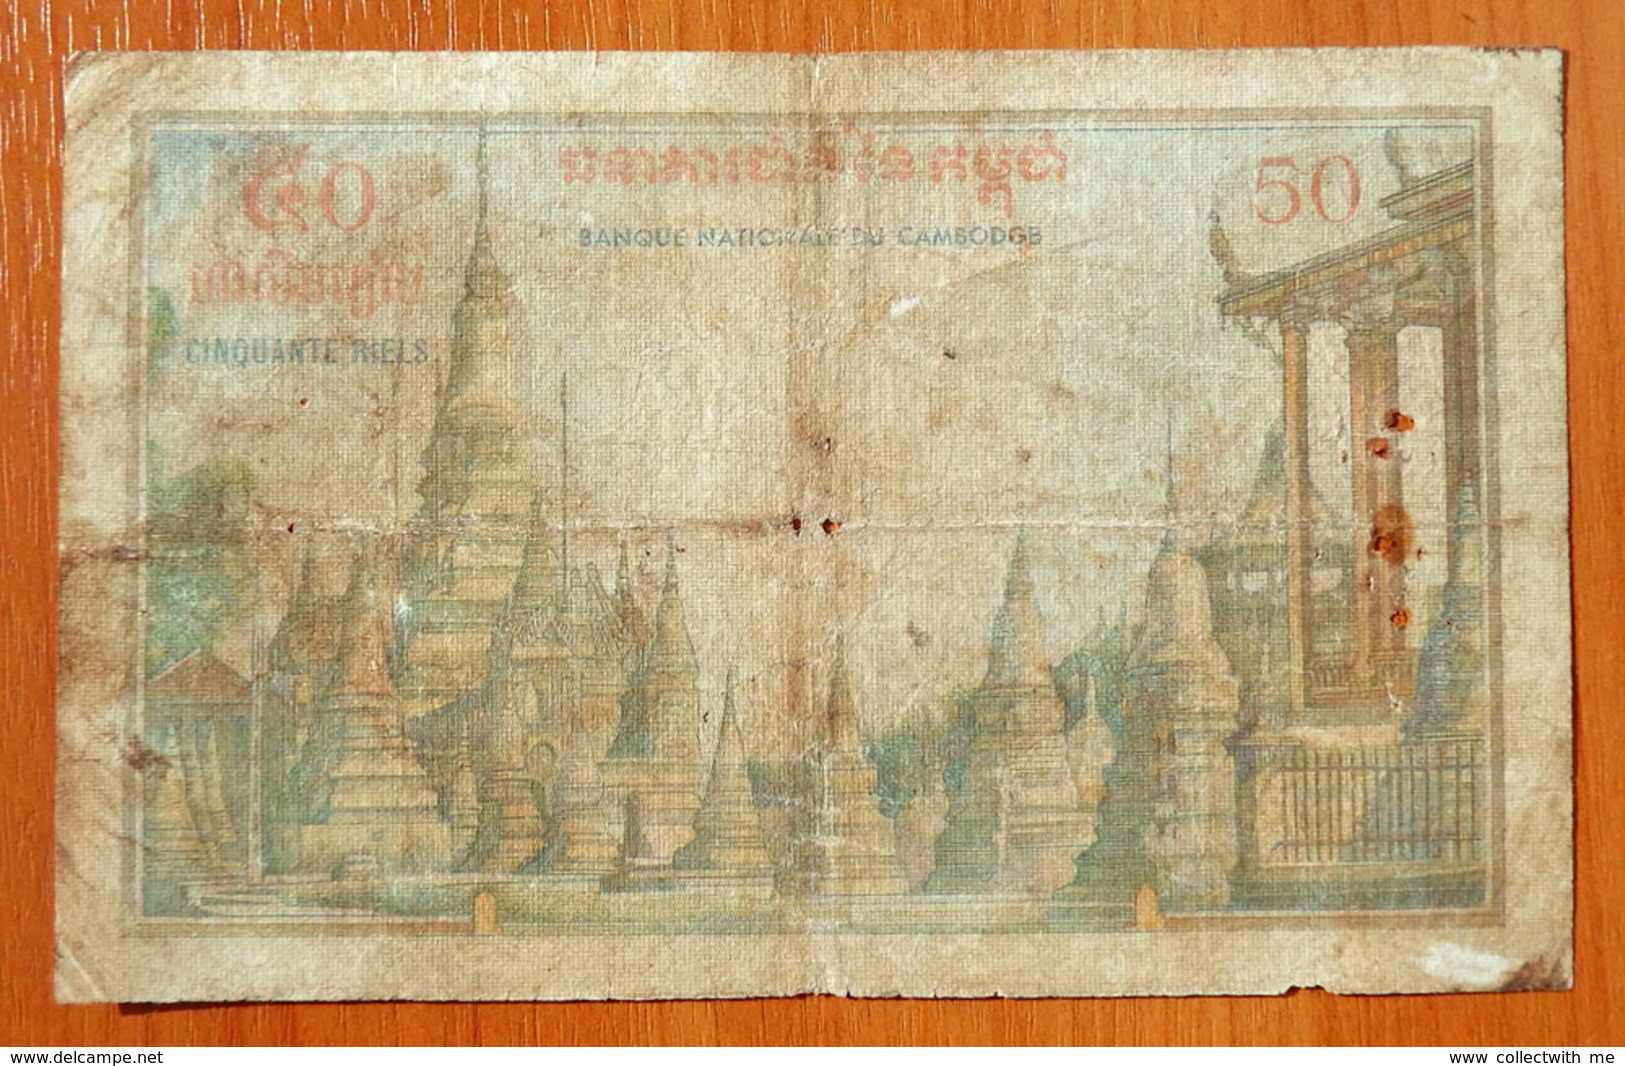 Cambodia 1, 5, 10 and 50 riels 1955-1956